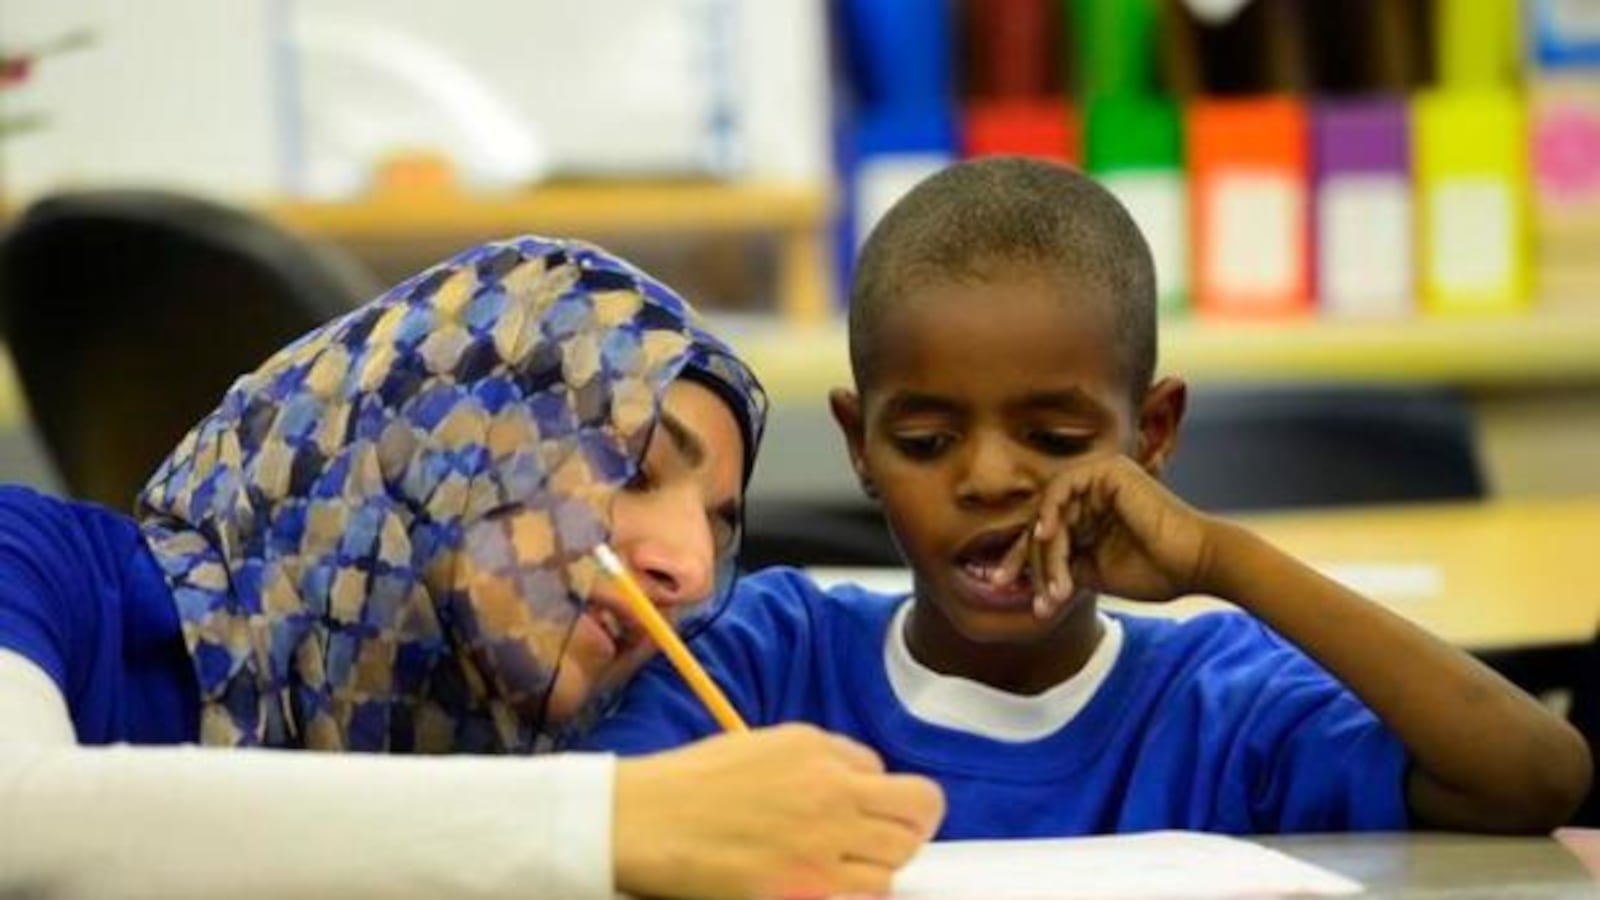 Merhan Zeina, a second-grade teacher at McMeen Elementary in Denver, helps Ahmed Abdelhadi, 8, write a number story.